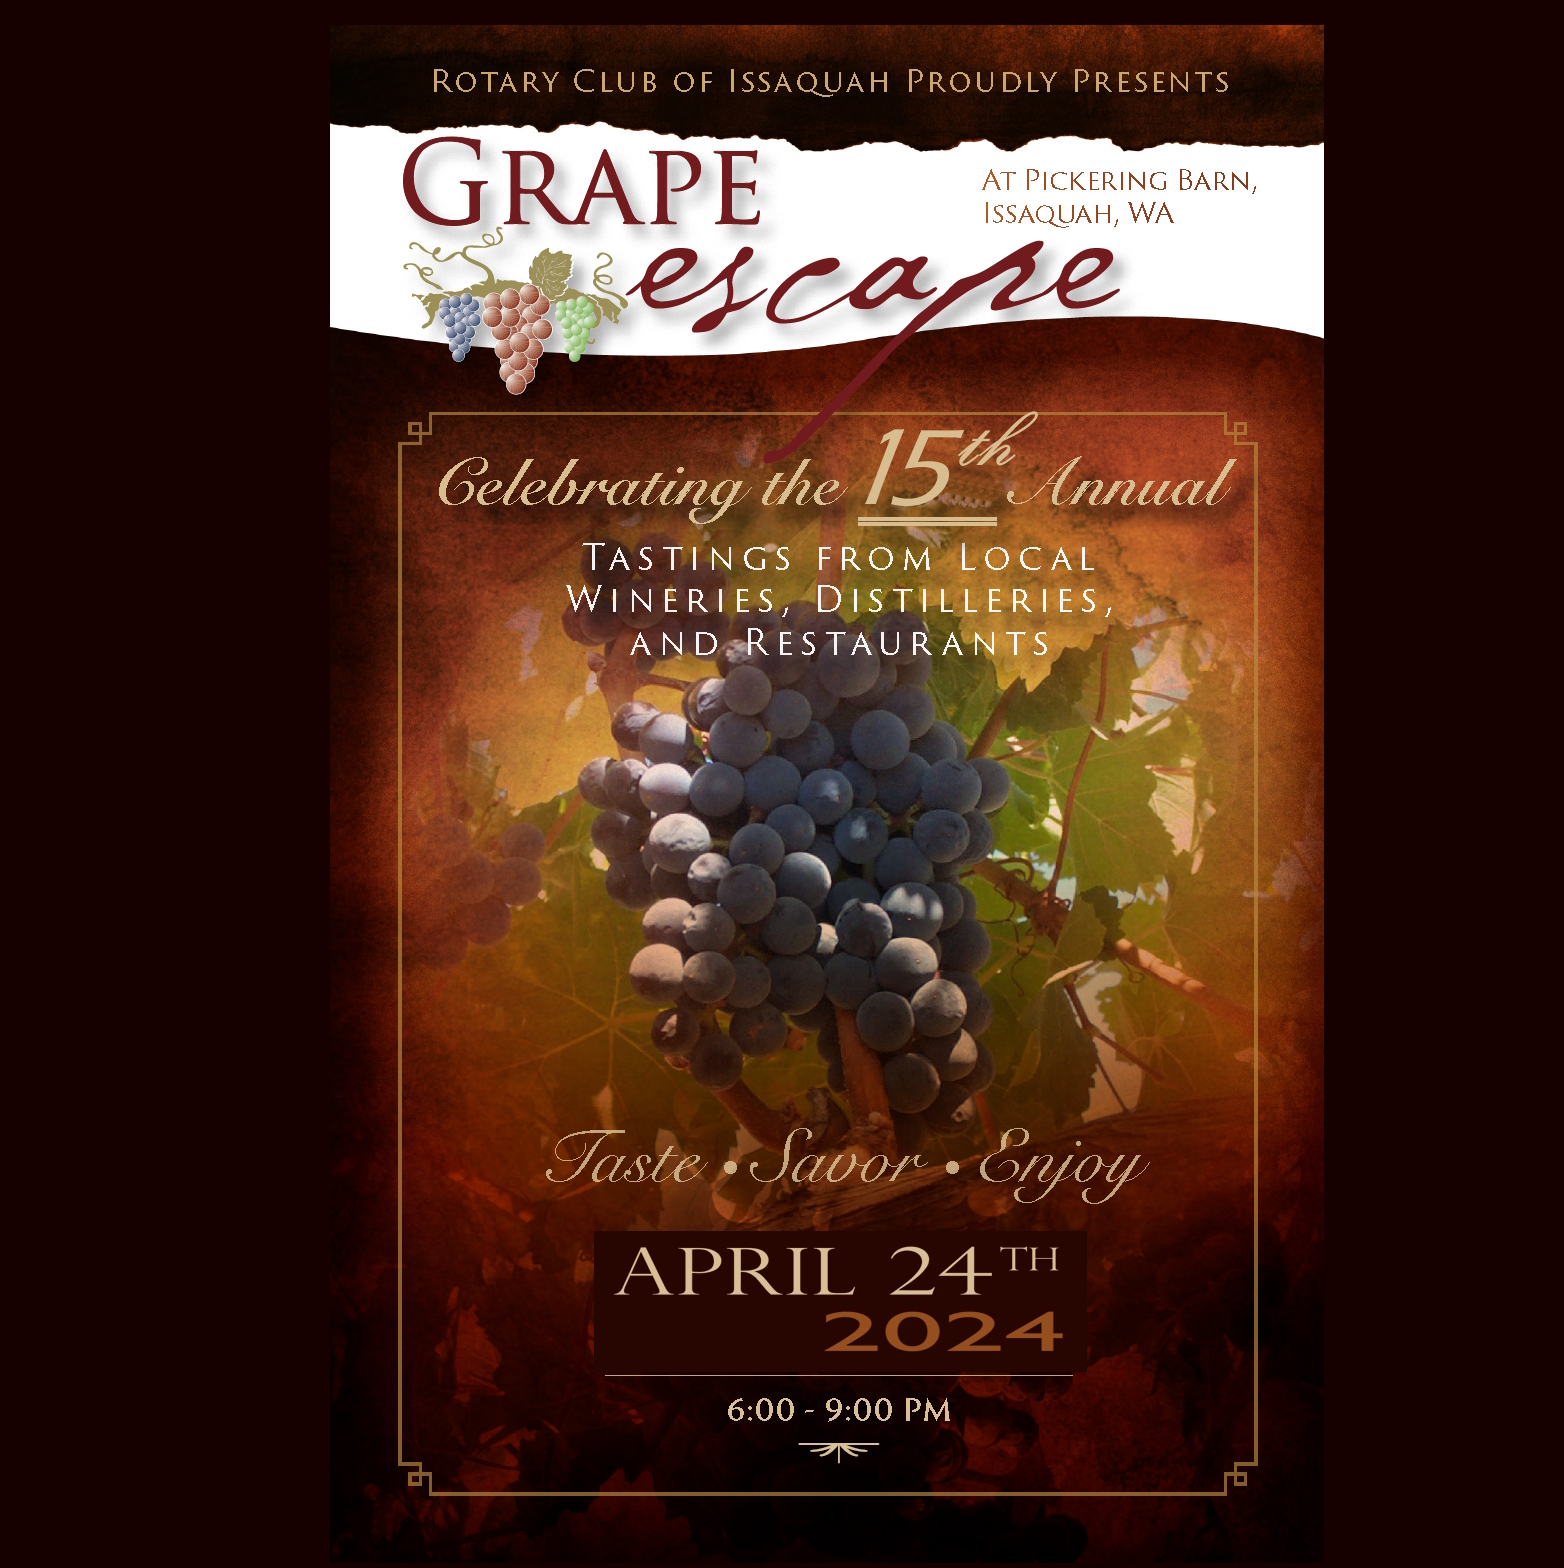 Grape Escape Wine and Food Tasting Event - Visit Issaquah